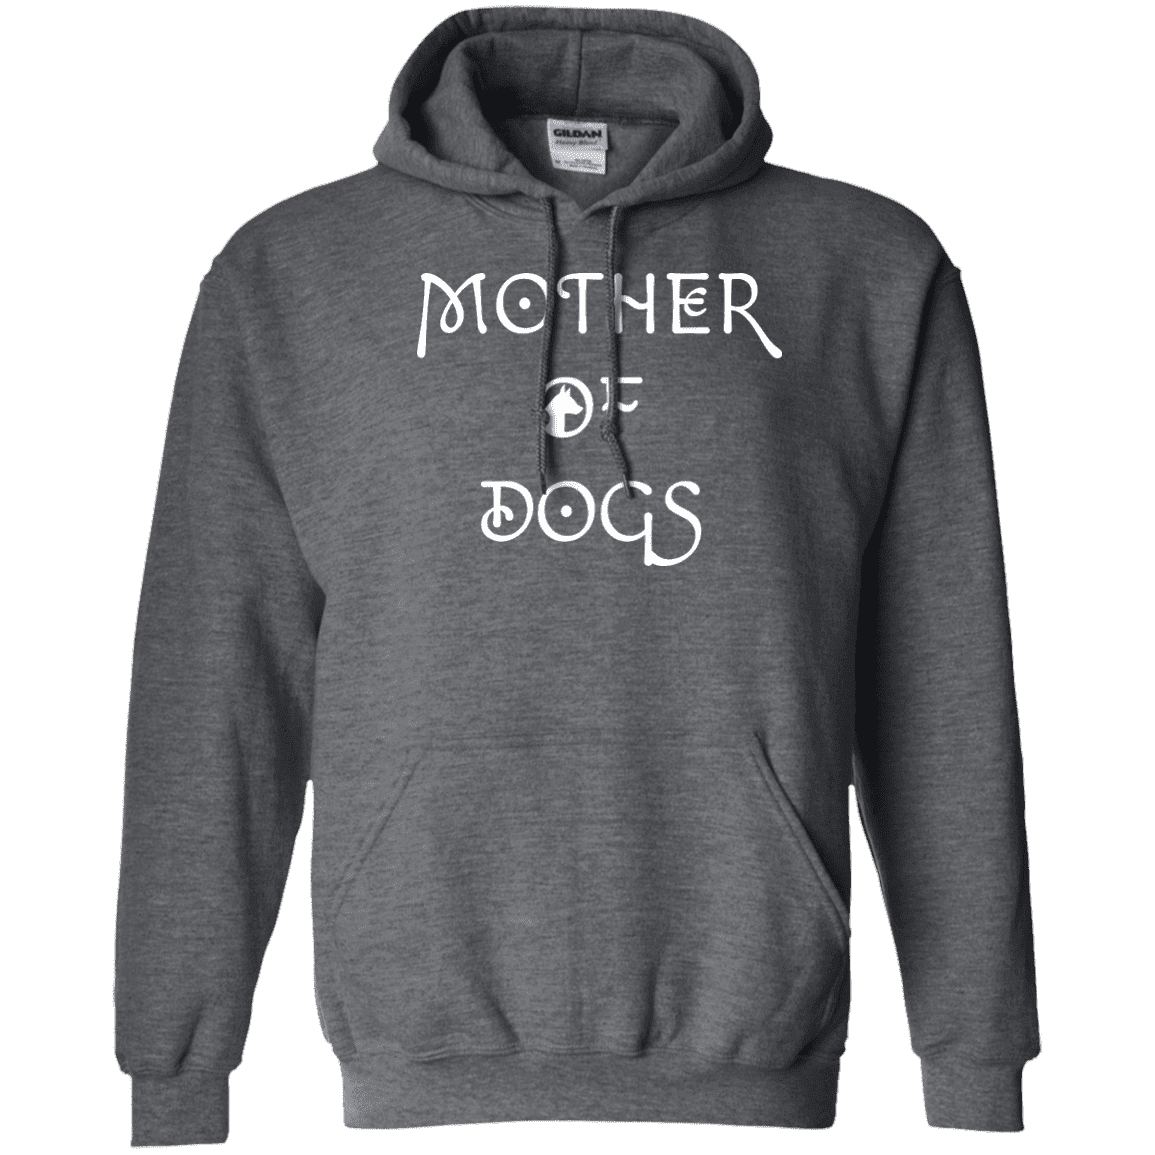 Mother Of Dogs - Hoodie.